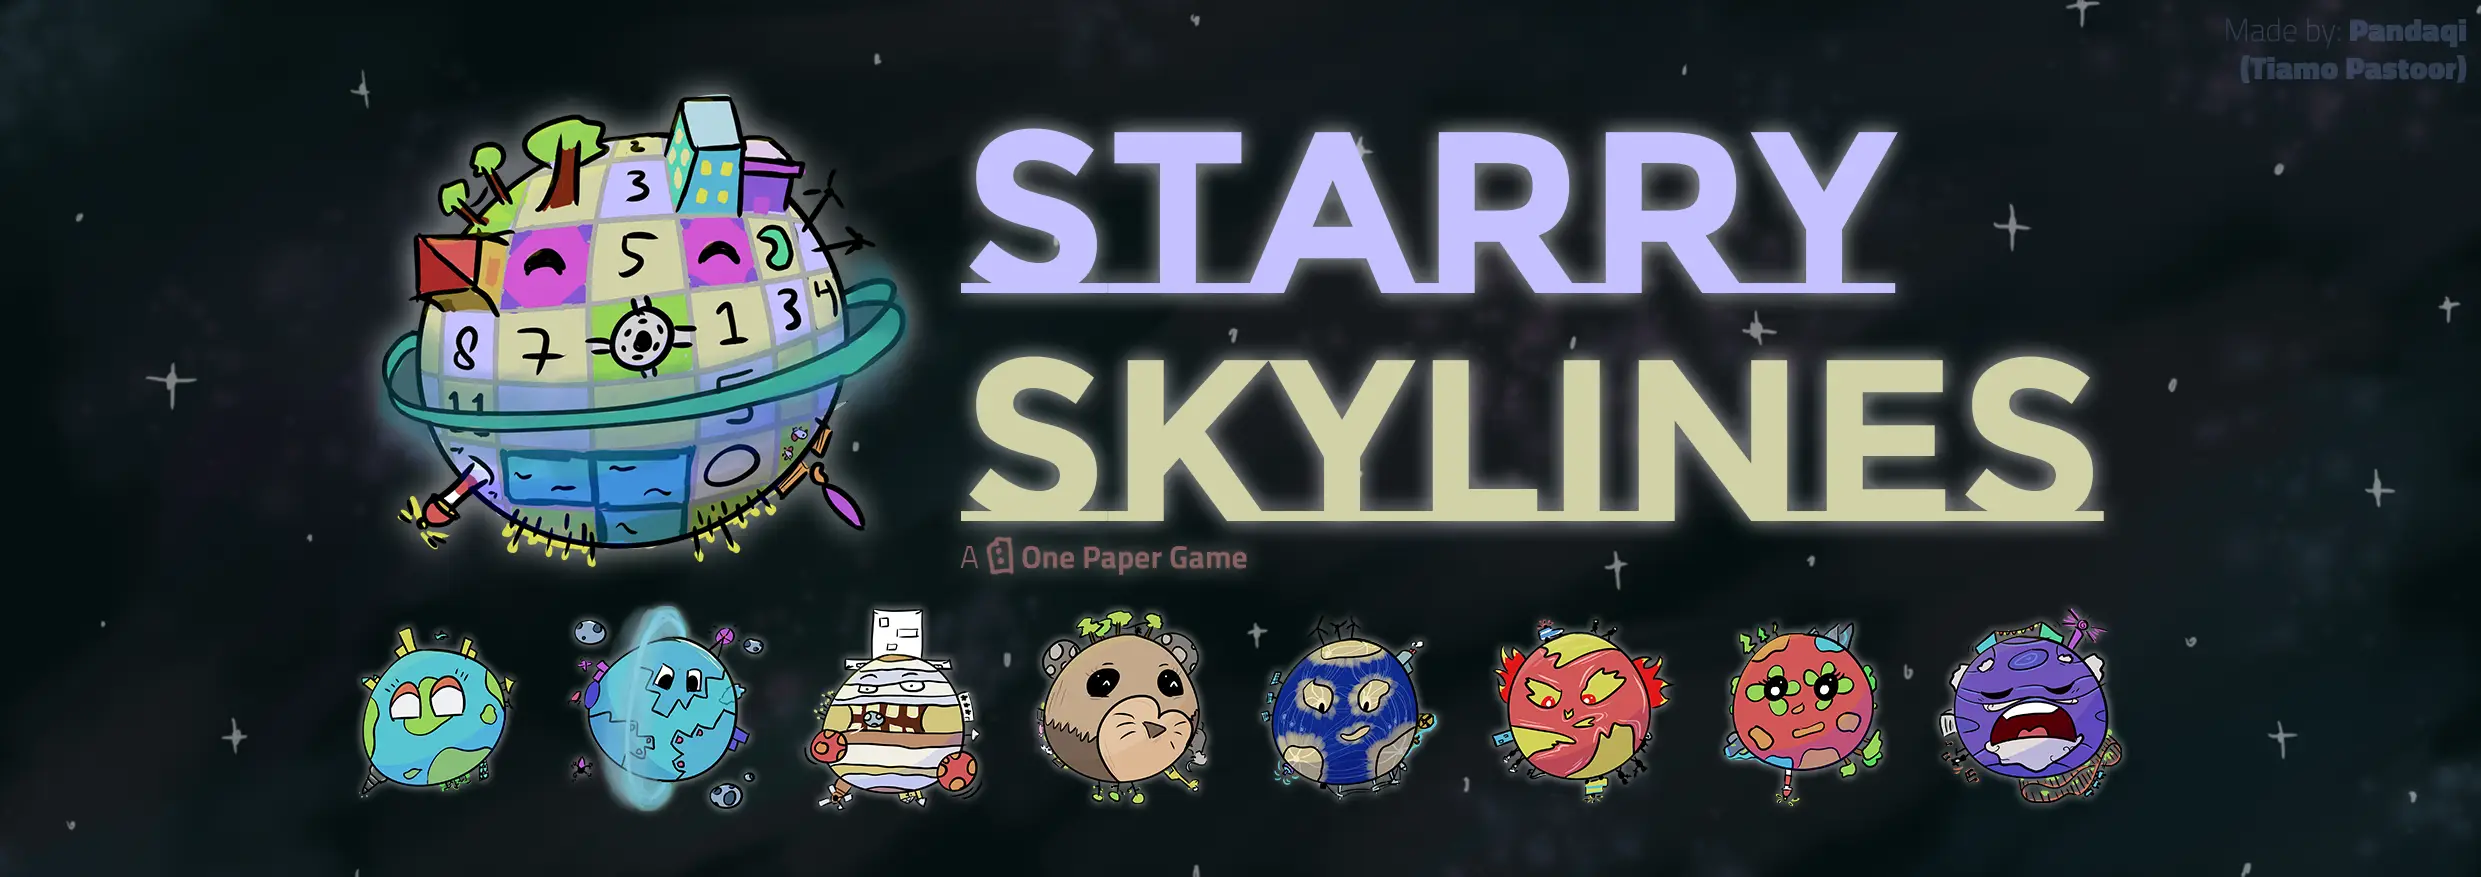 Thumbnail / Header for article: Starry Skylines (Part 3)